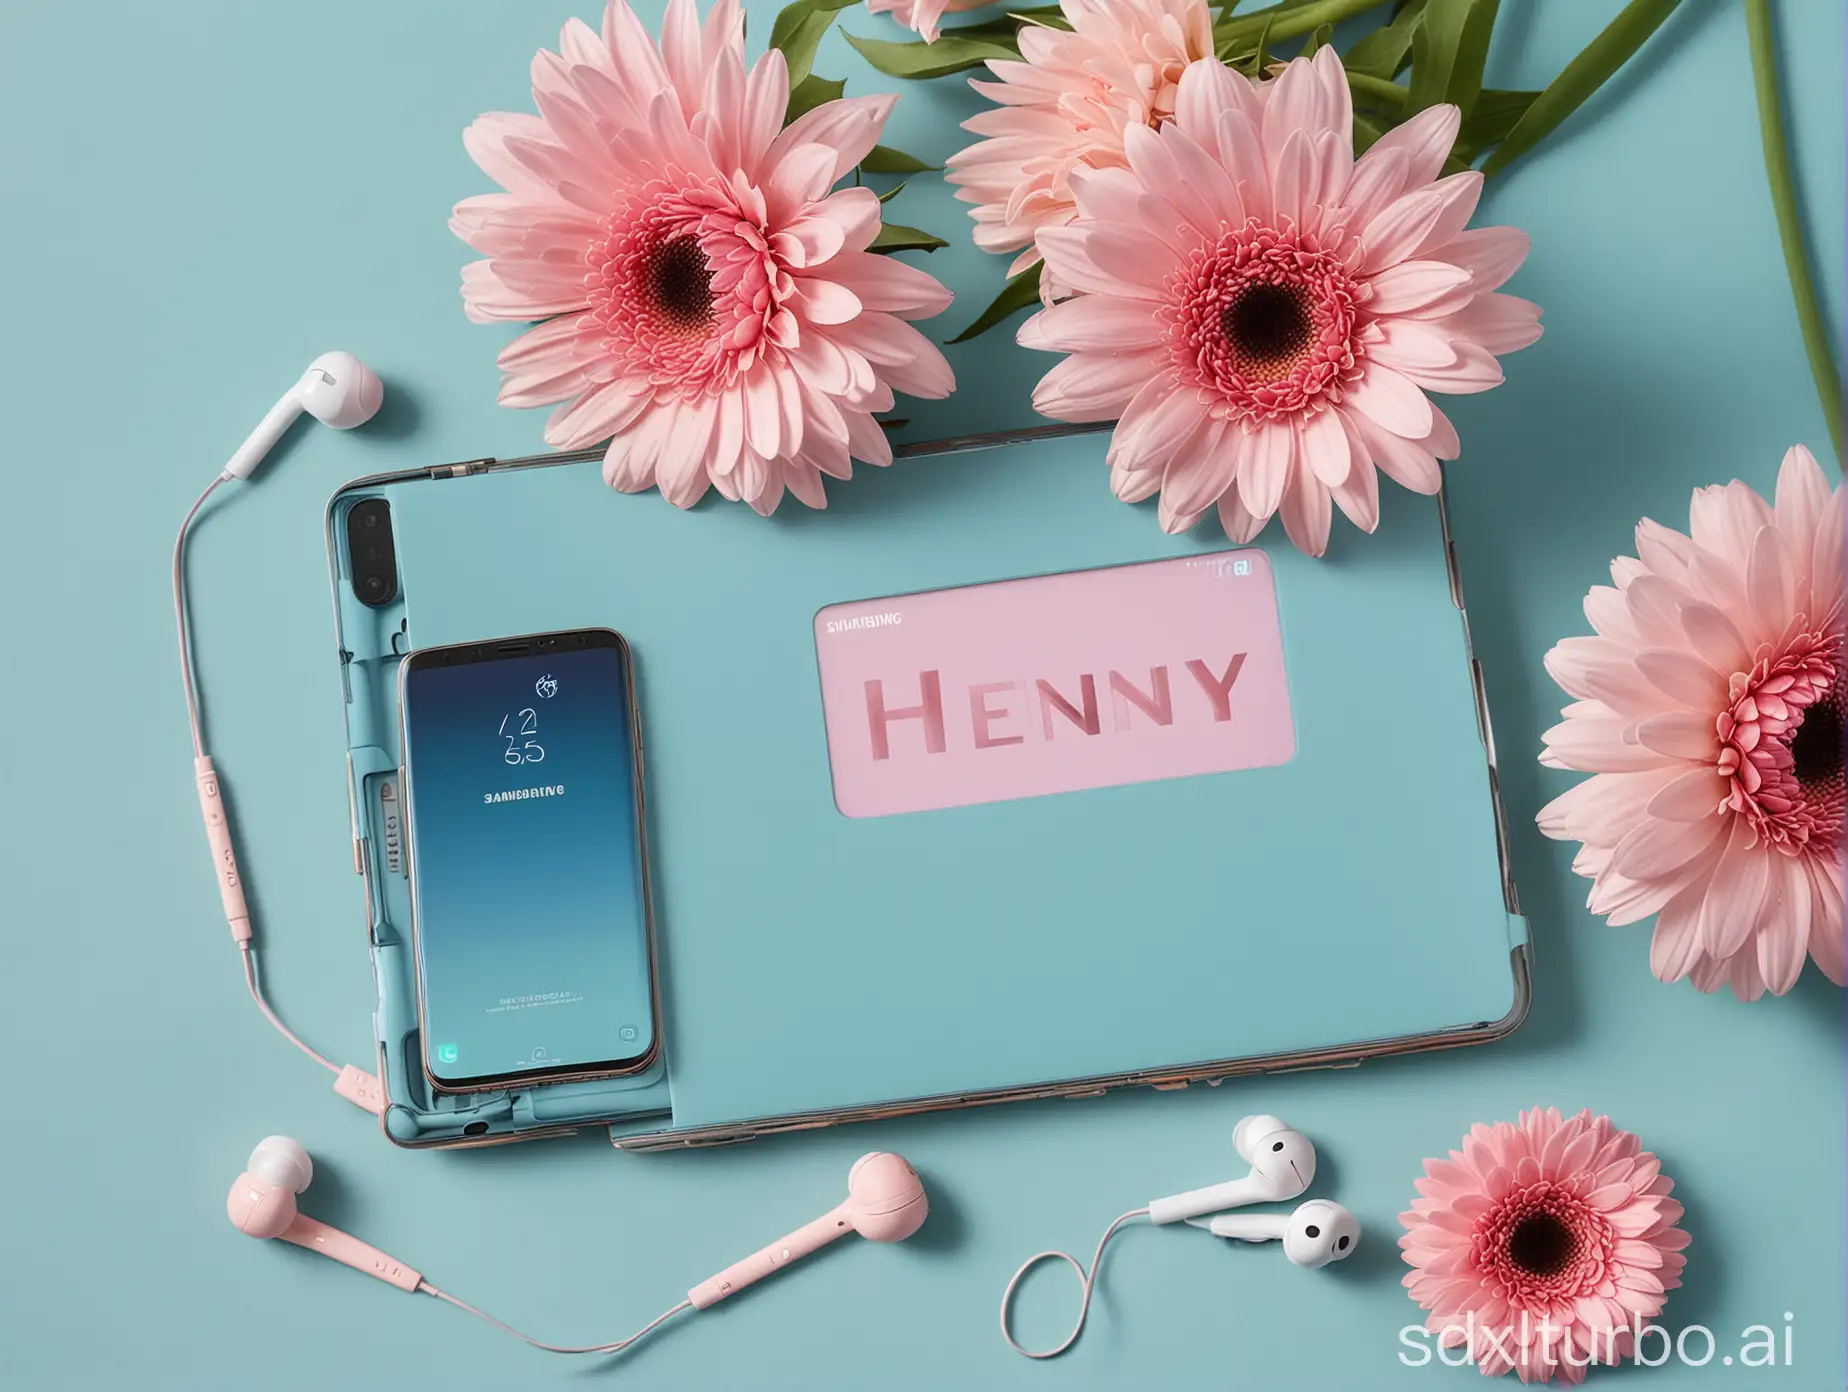 Woman-Texting-on-Samsung-Laptop-and-Mobile-Phone-with-Earbuds-and-Flowers-in-Blue-Aqua-Background